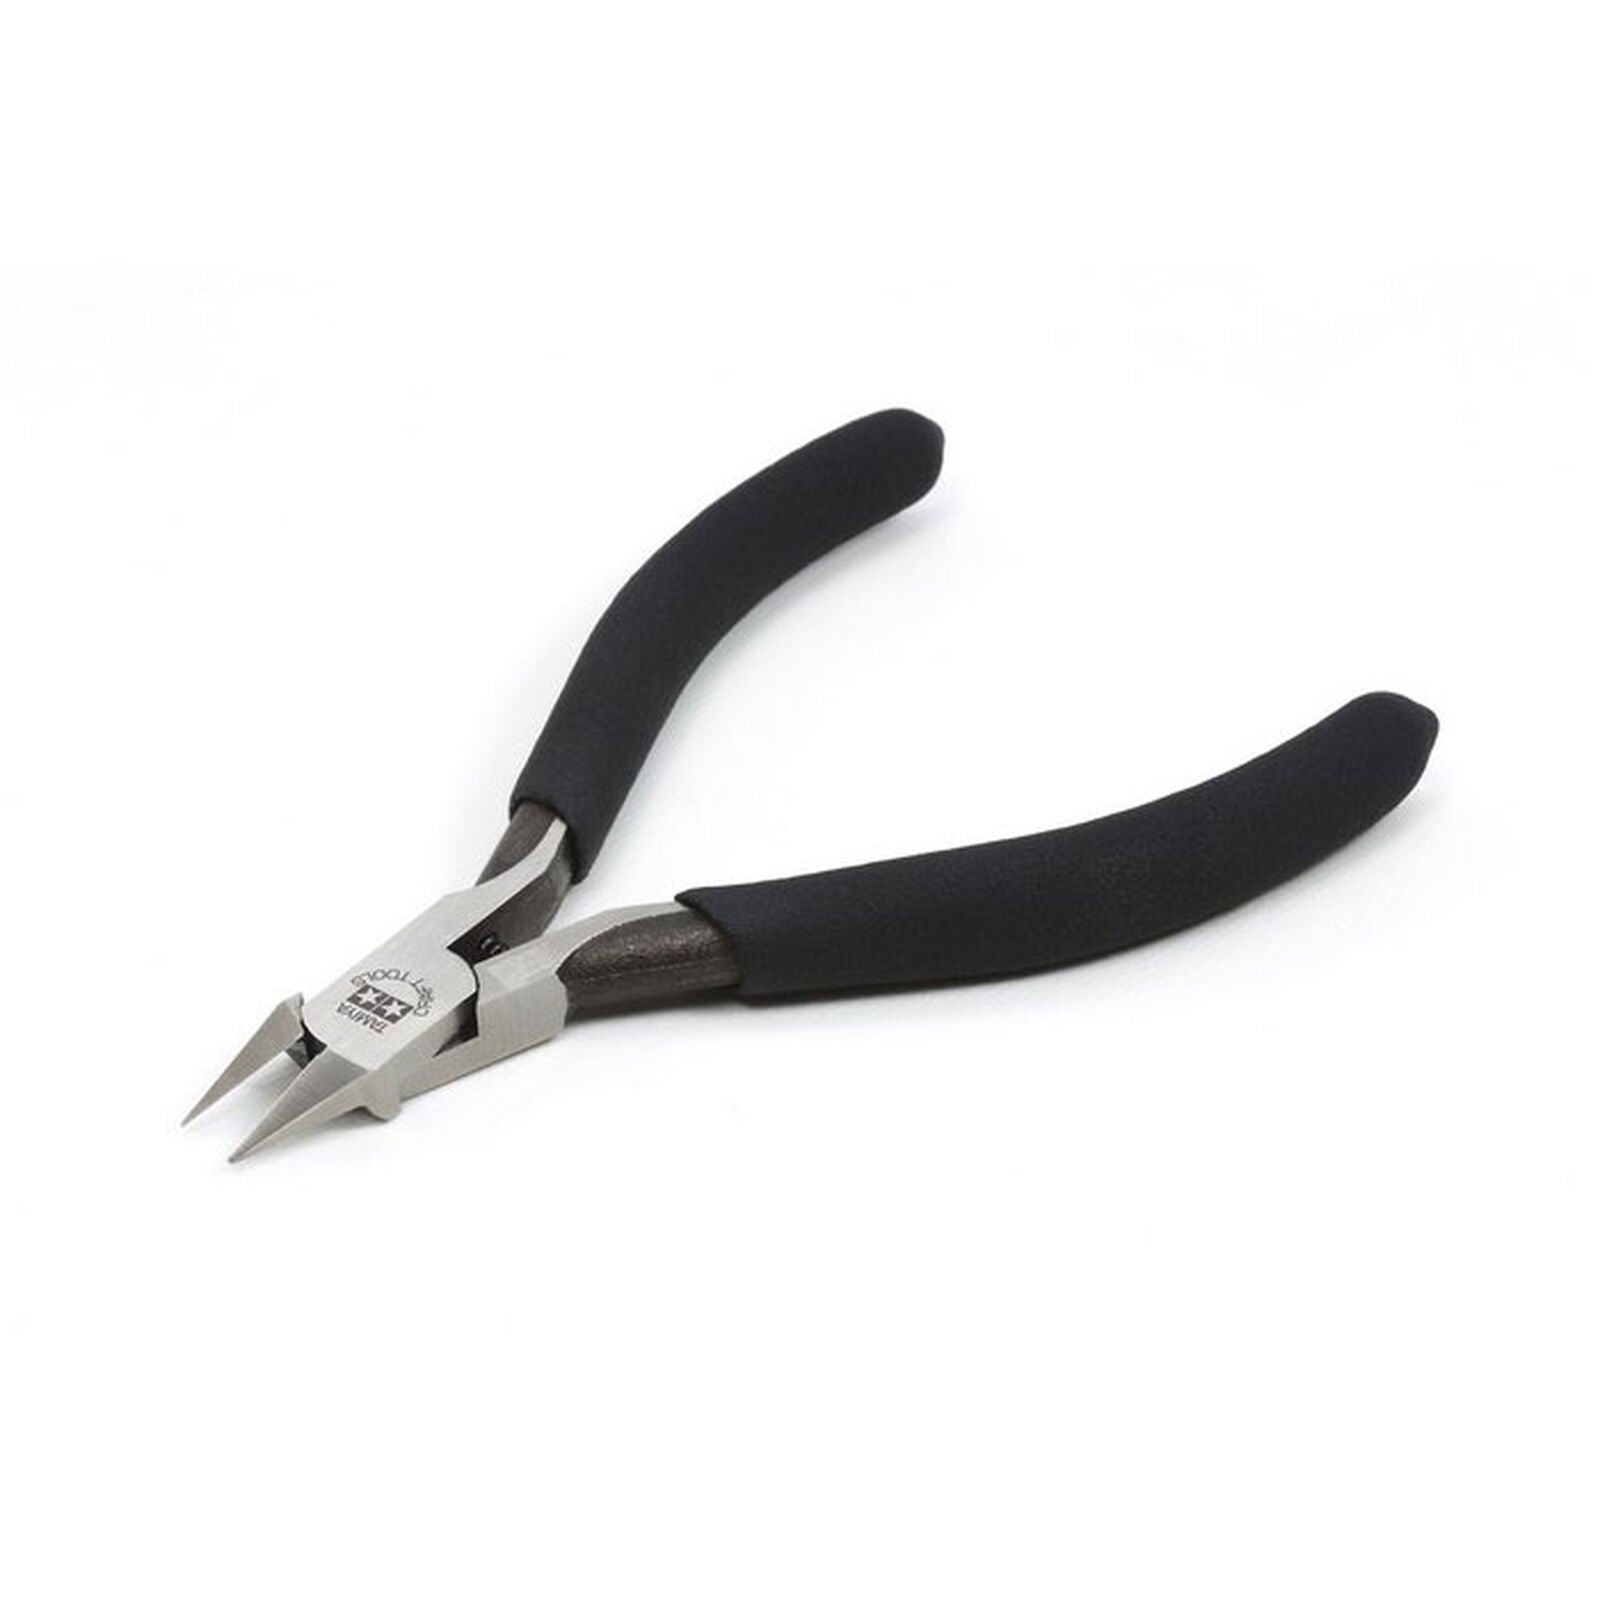 TAMIYA 74123 Sharp Pointed Side Cutter For Plastic